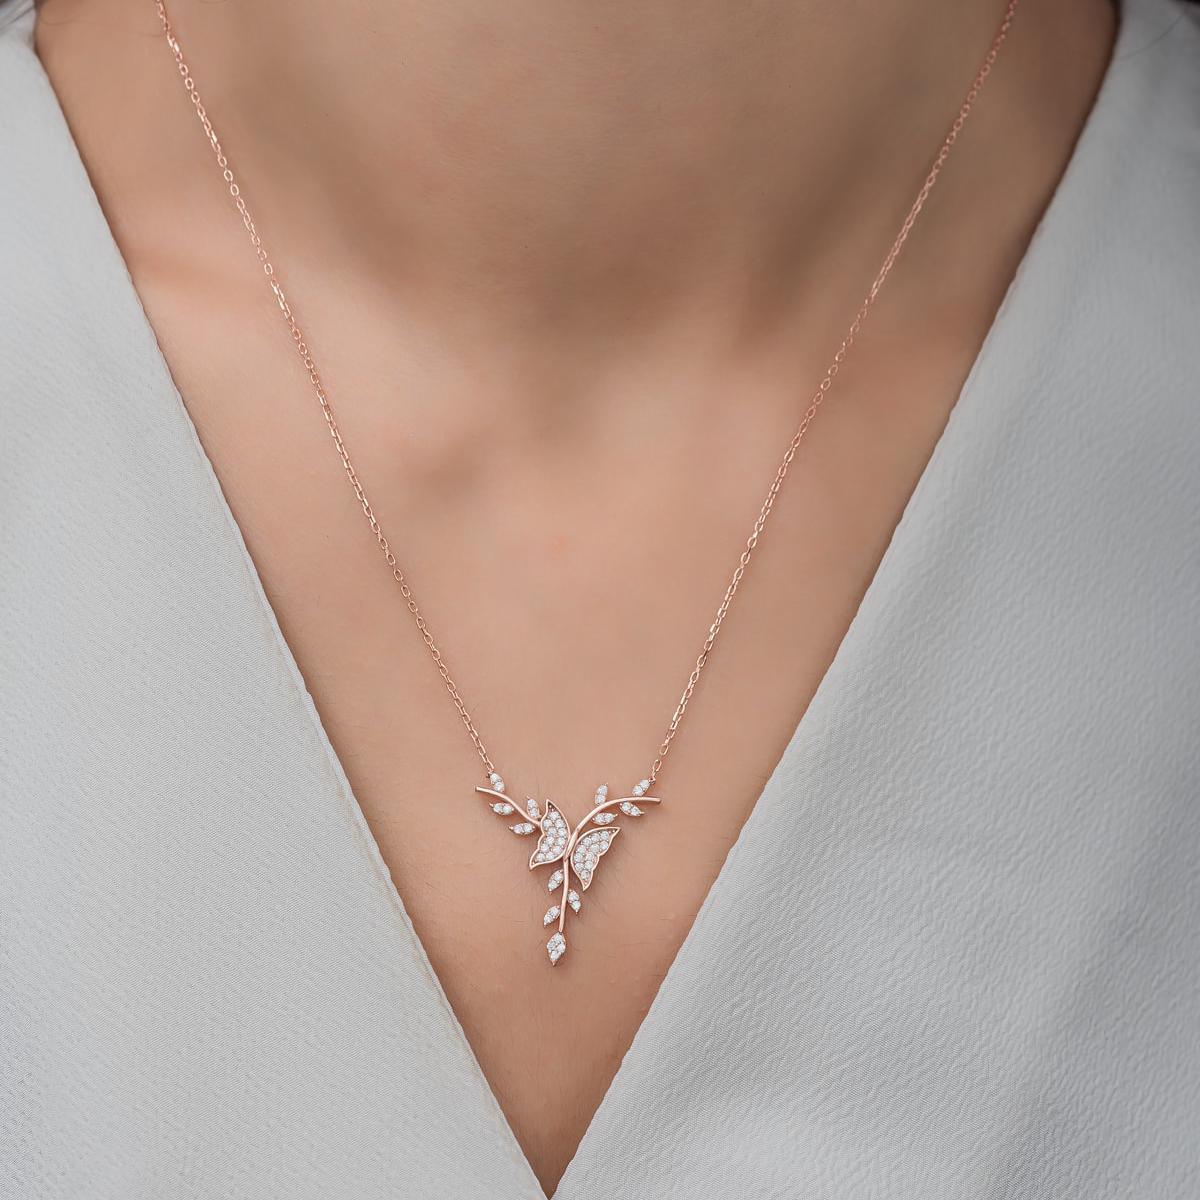 Diamond Butterfly Ivy Necklace • Butterfly Ivy Necklace Pendant - Trending Silver Gifts